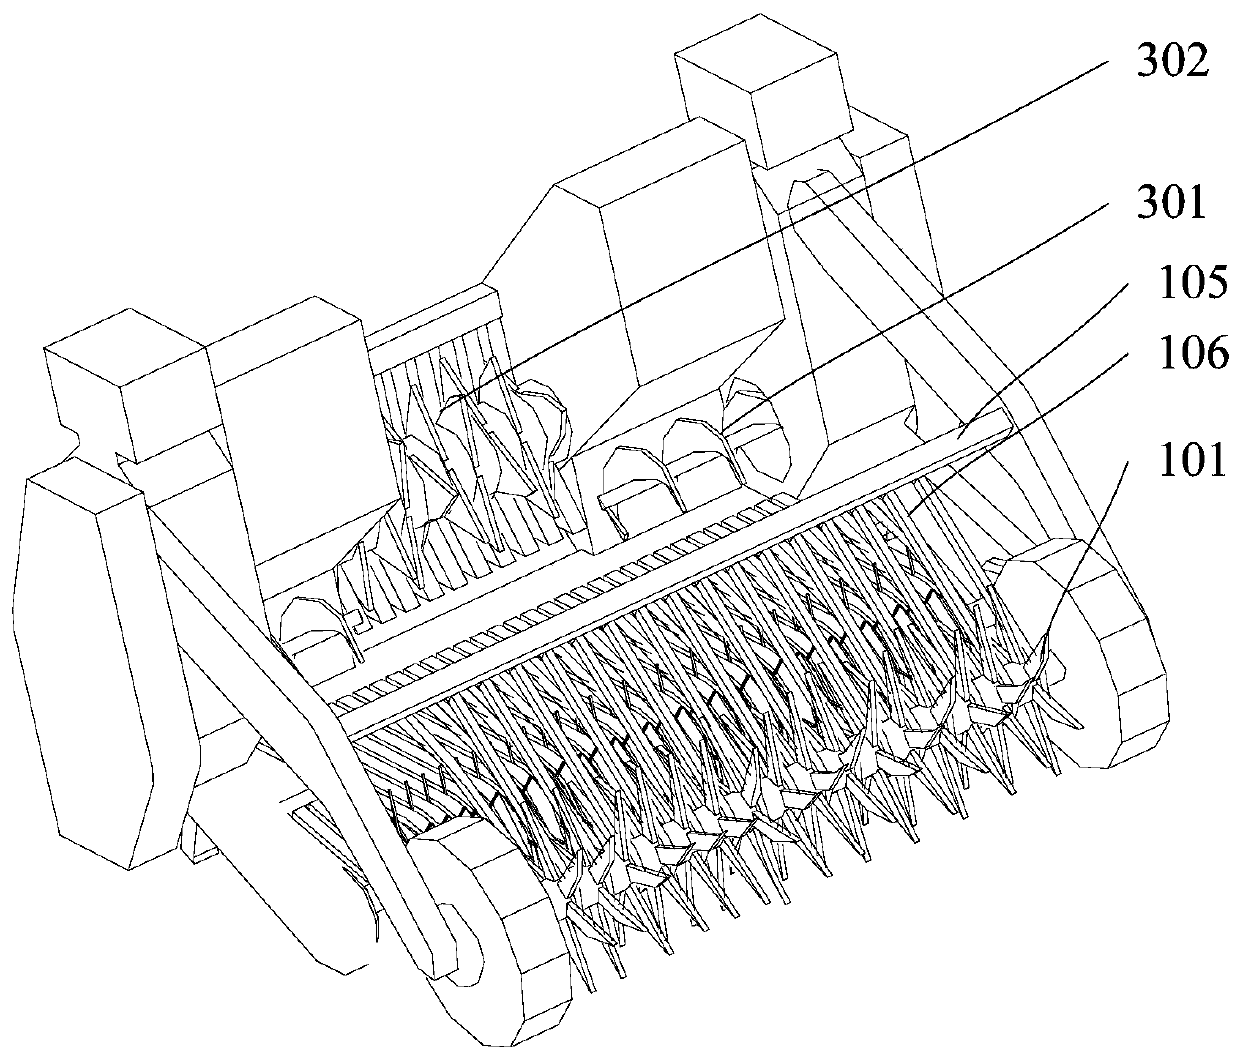 Pellet forming machine and agricultural machinery system